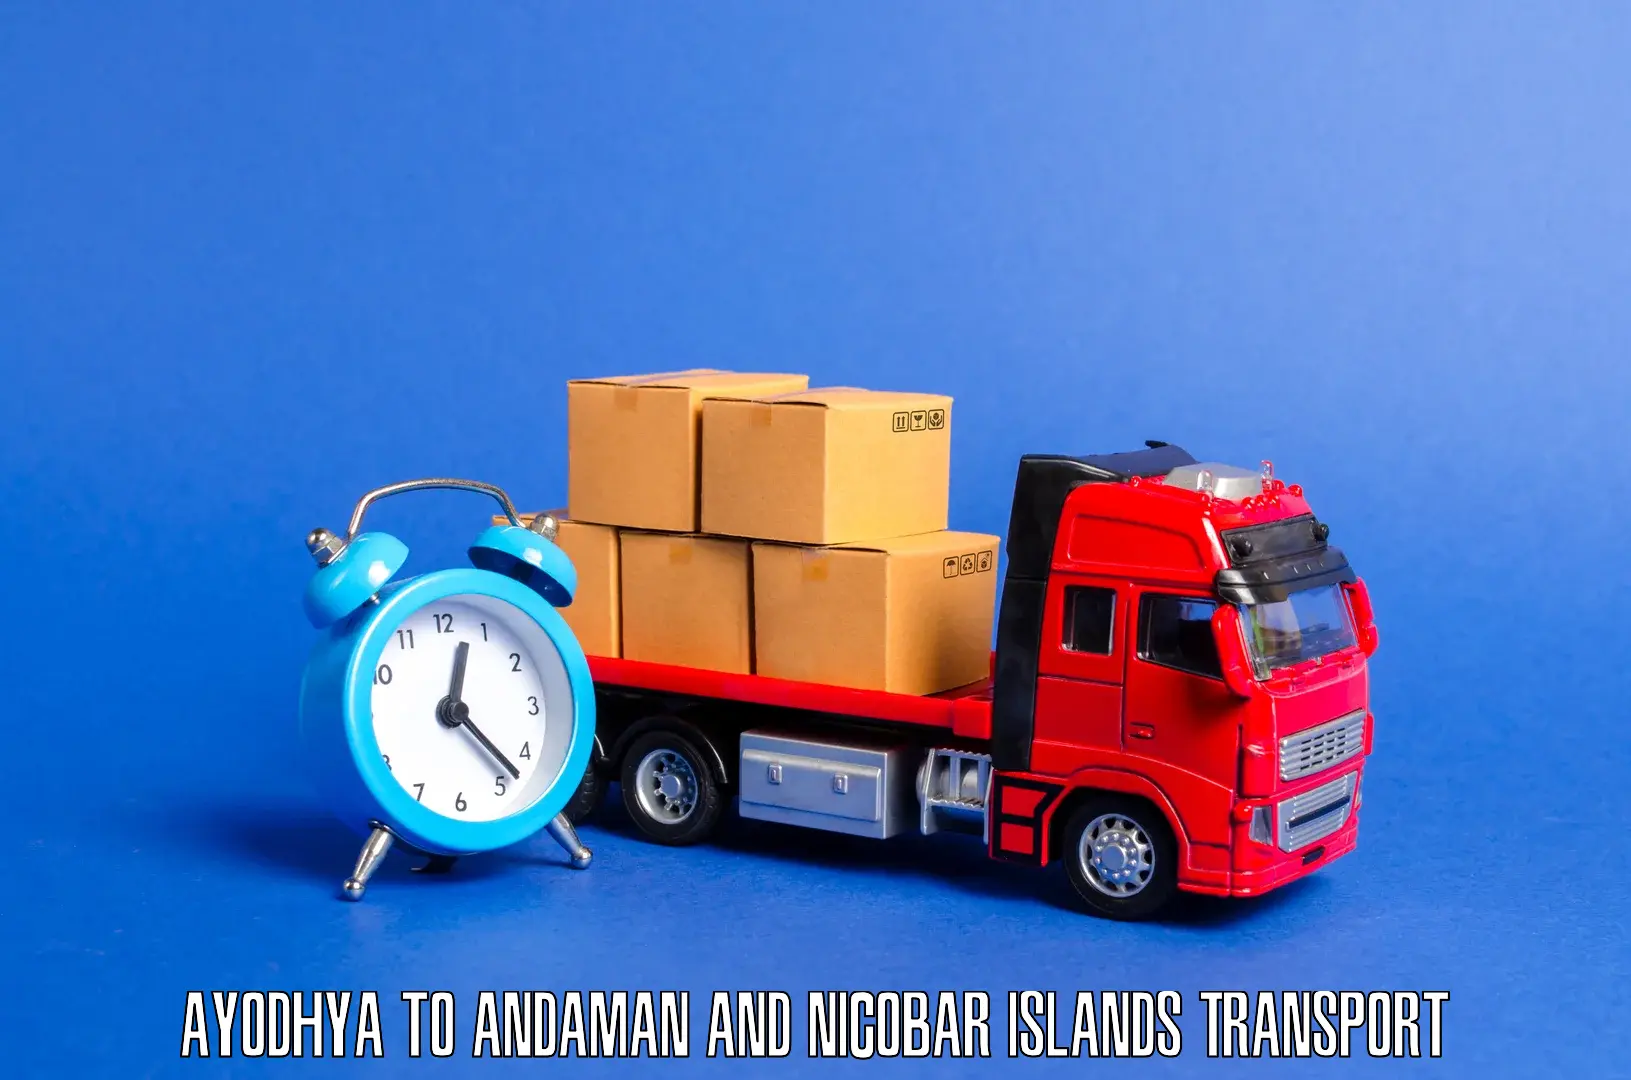 Transport shared services Ayodhya to Andaman and Nicobar Islands